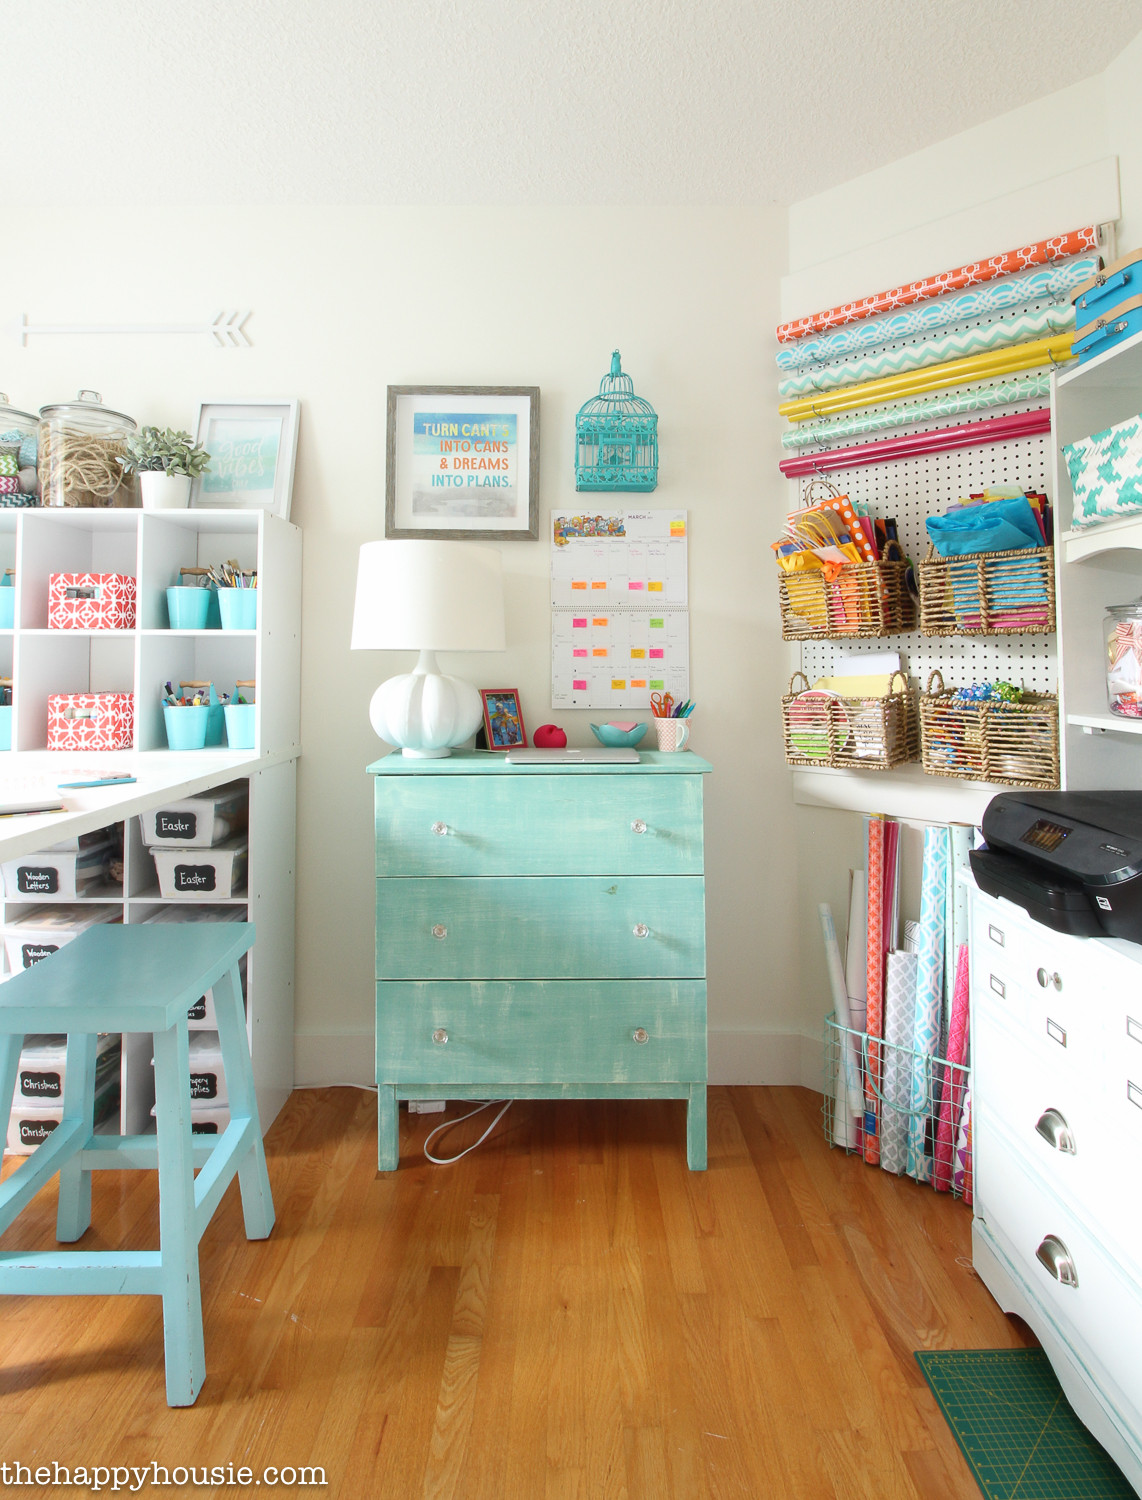 Craft Room Organizing Ideas
 How to Organize a Craft Room Work Space